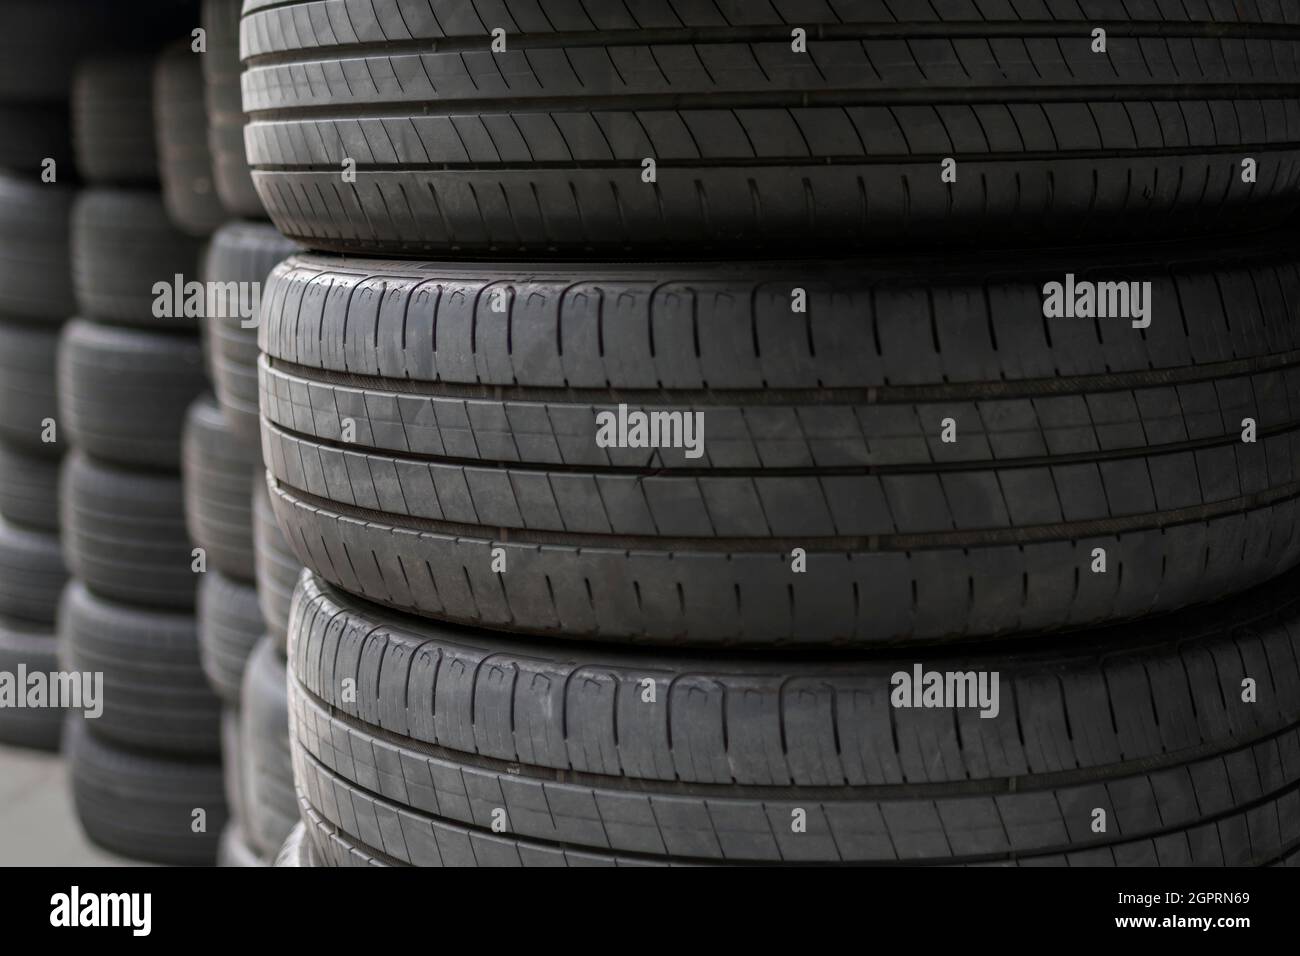 Full Frame Shot Of A Stack Of Used Tires Stock Photo